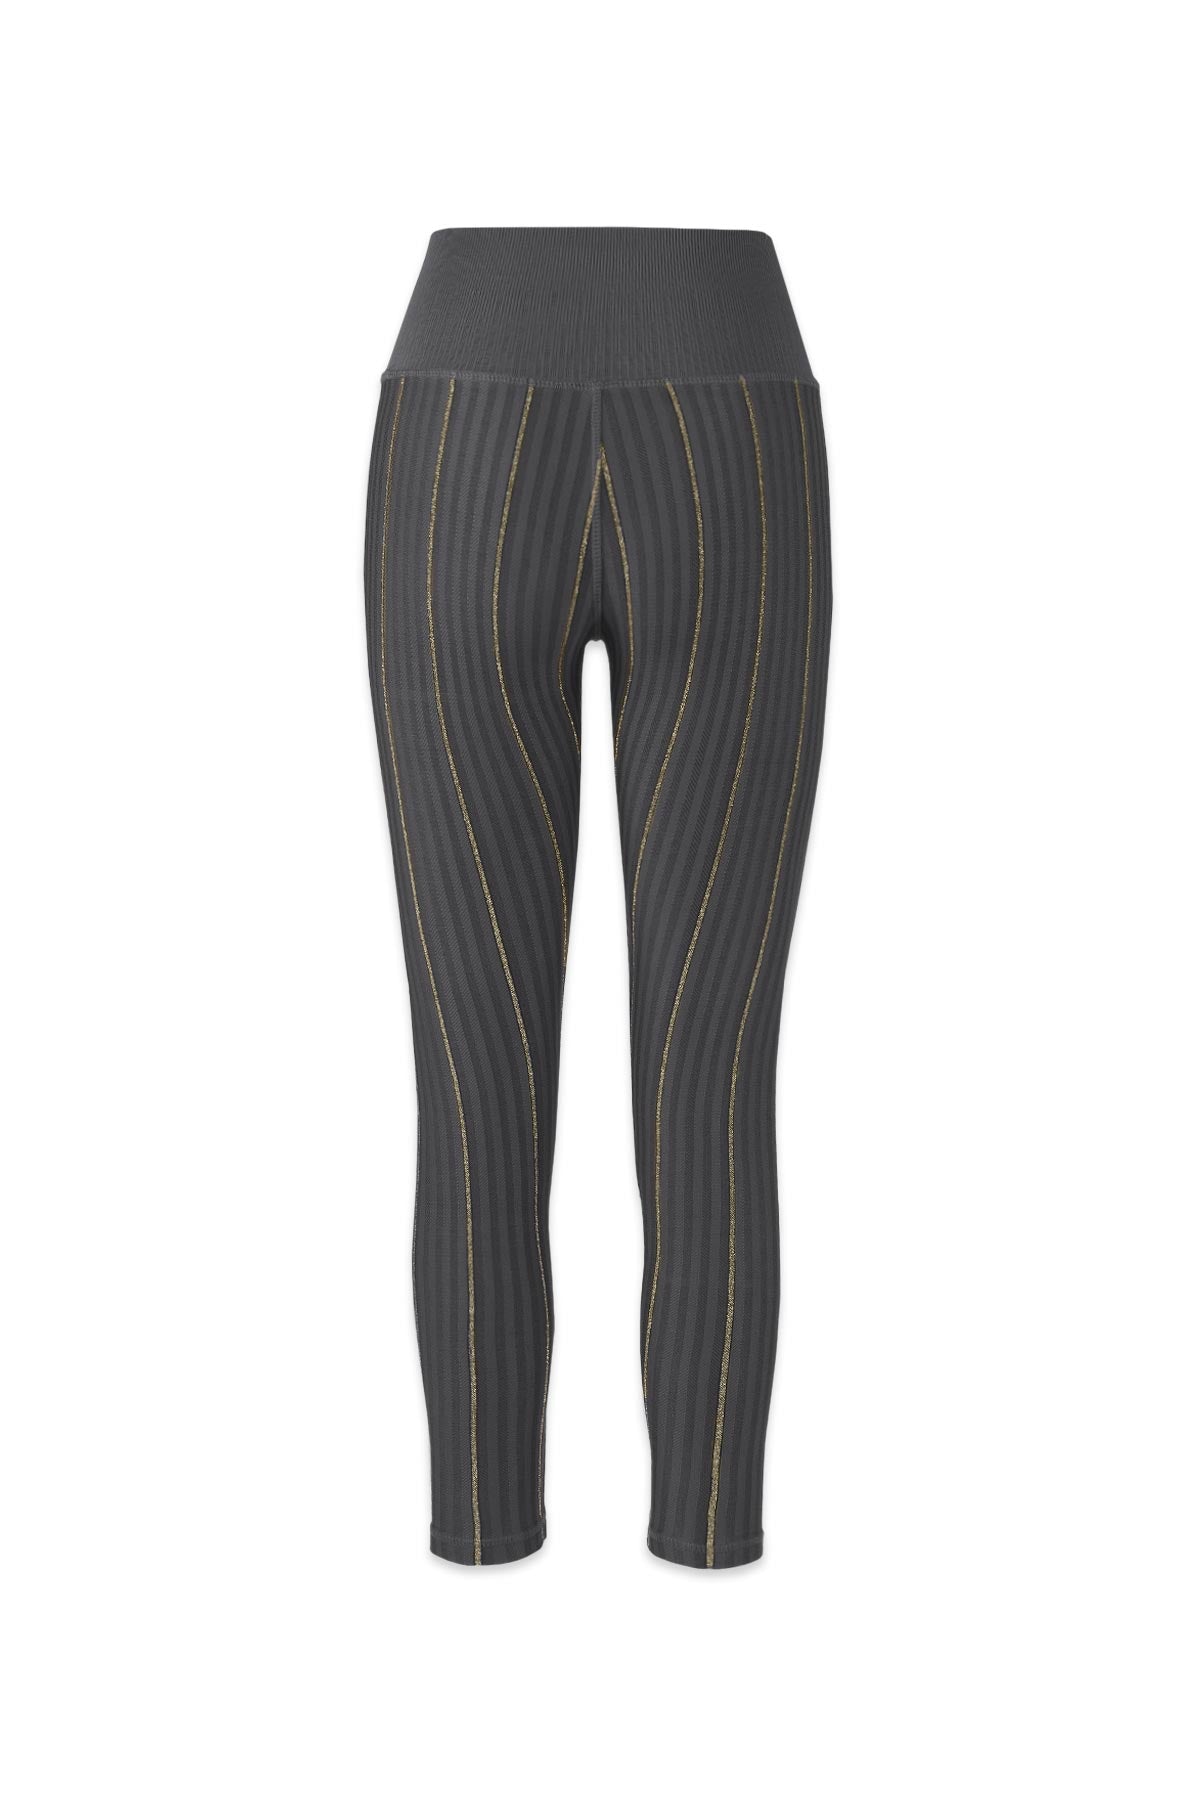 Charcoal Gray and Black Horizontal Stripes Leggings for Sale by  ColorPatterns